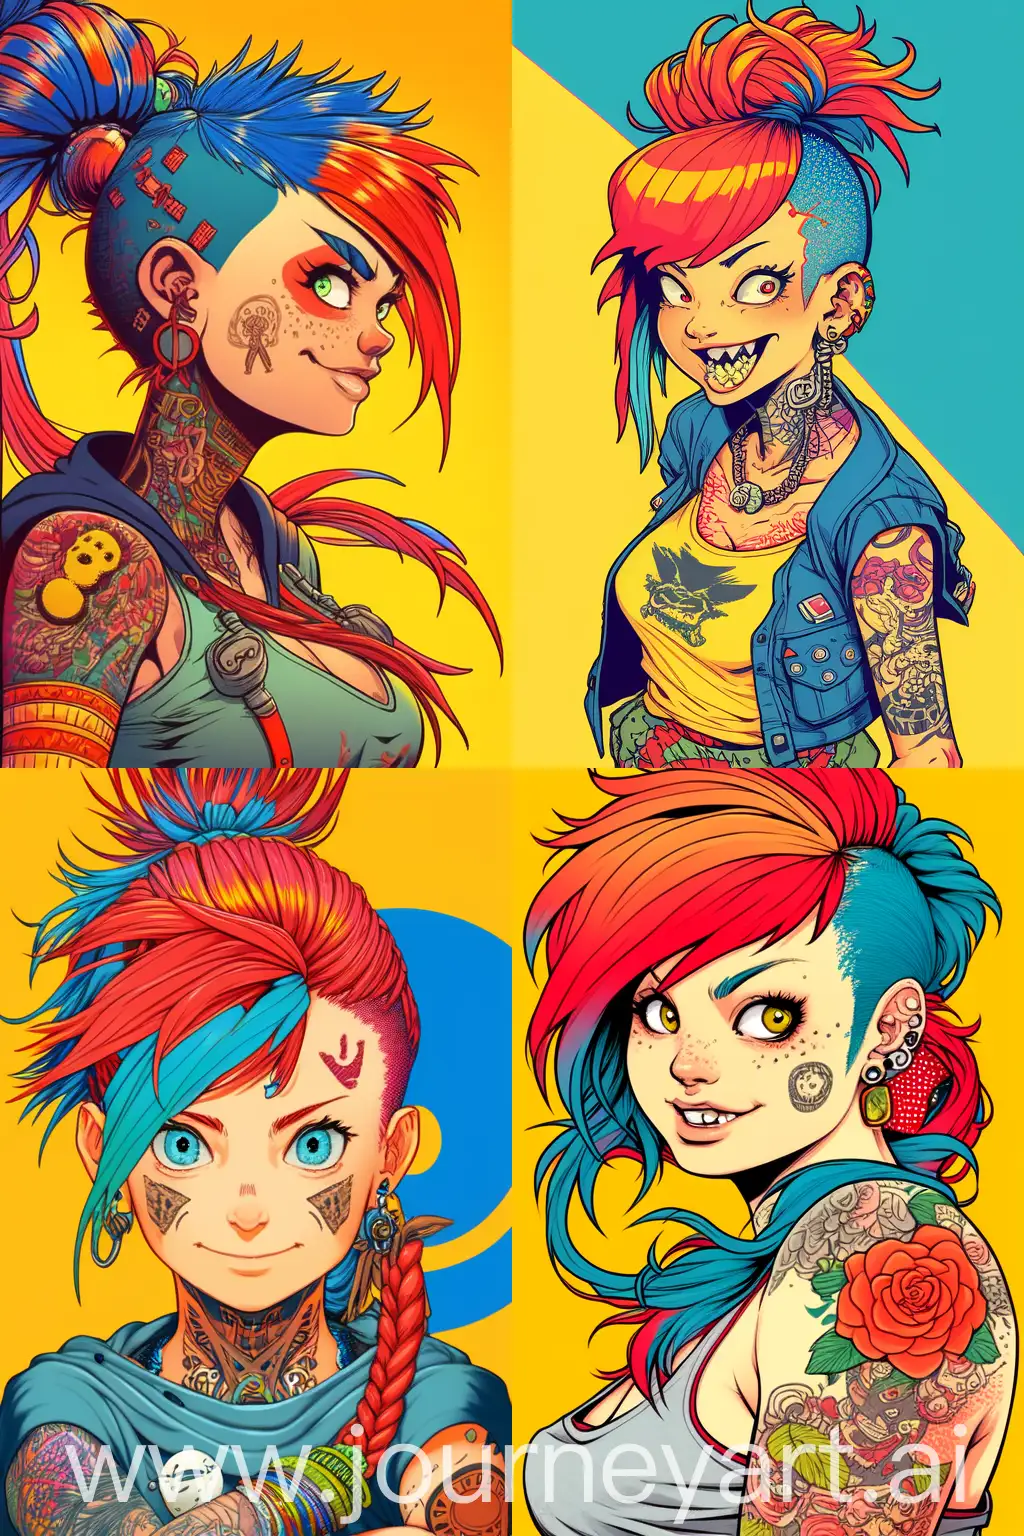 Anime-Style-Illustration-of-Smiling-Female-Character-with-Colorful-Hair-and-Tattoos-on-Yellow-Background